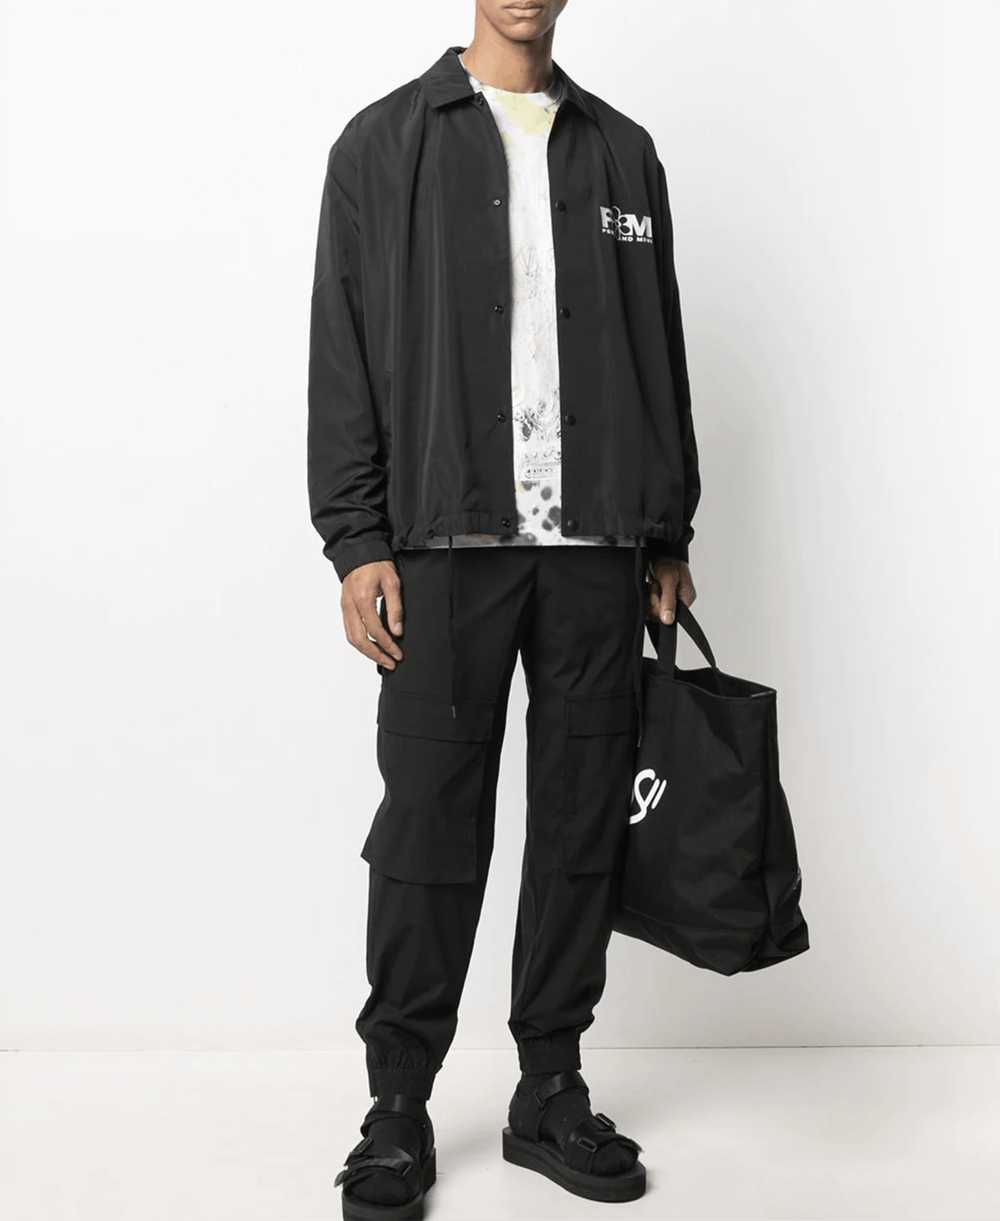 Perks And Mini Gestures Coach Jacket - image 5